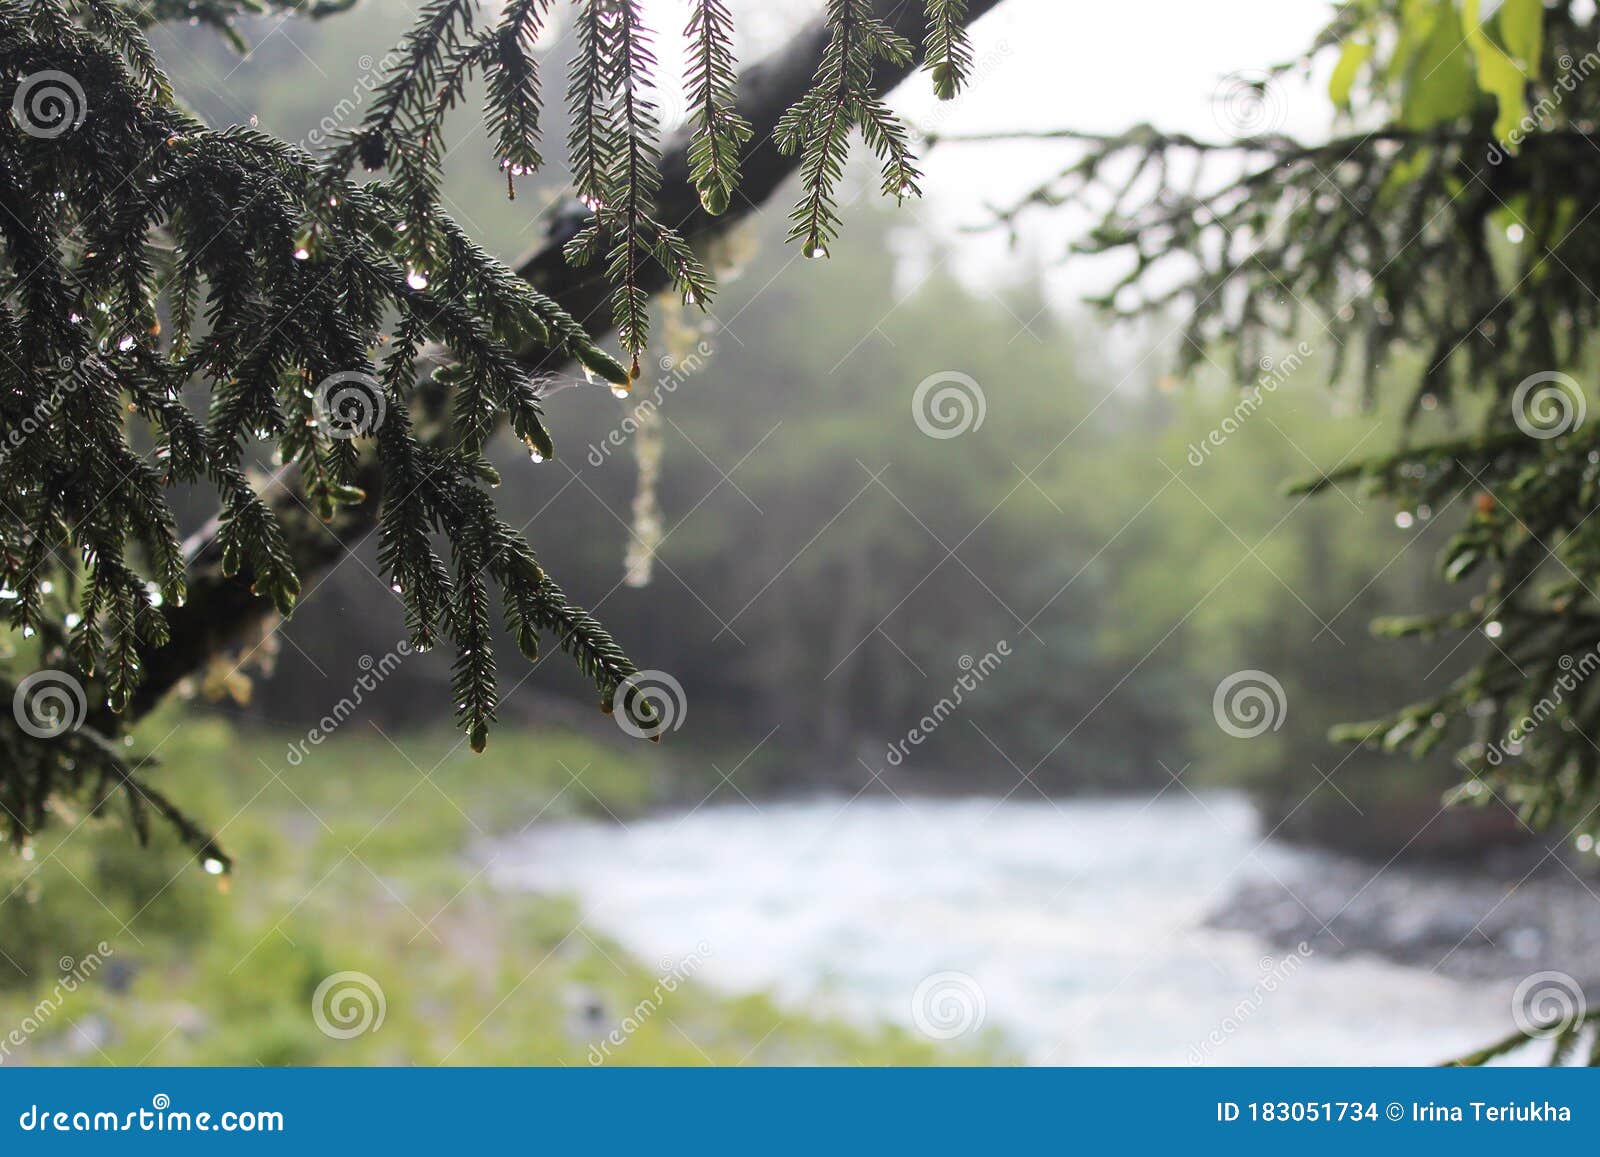 Pine Branches with Water Drops on a Rainy Day Stock Photo - Image of